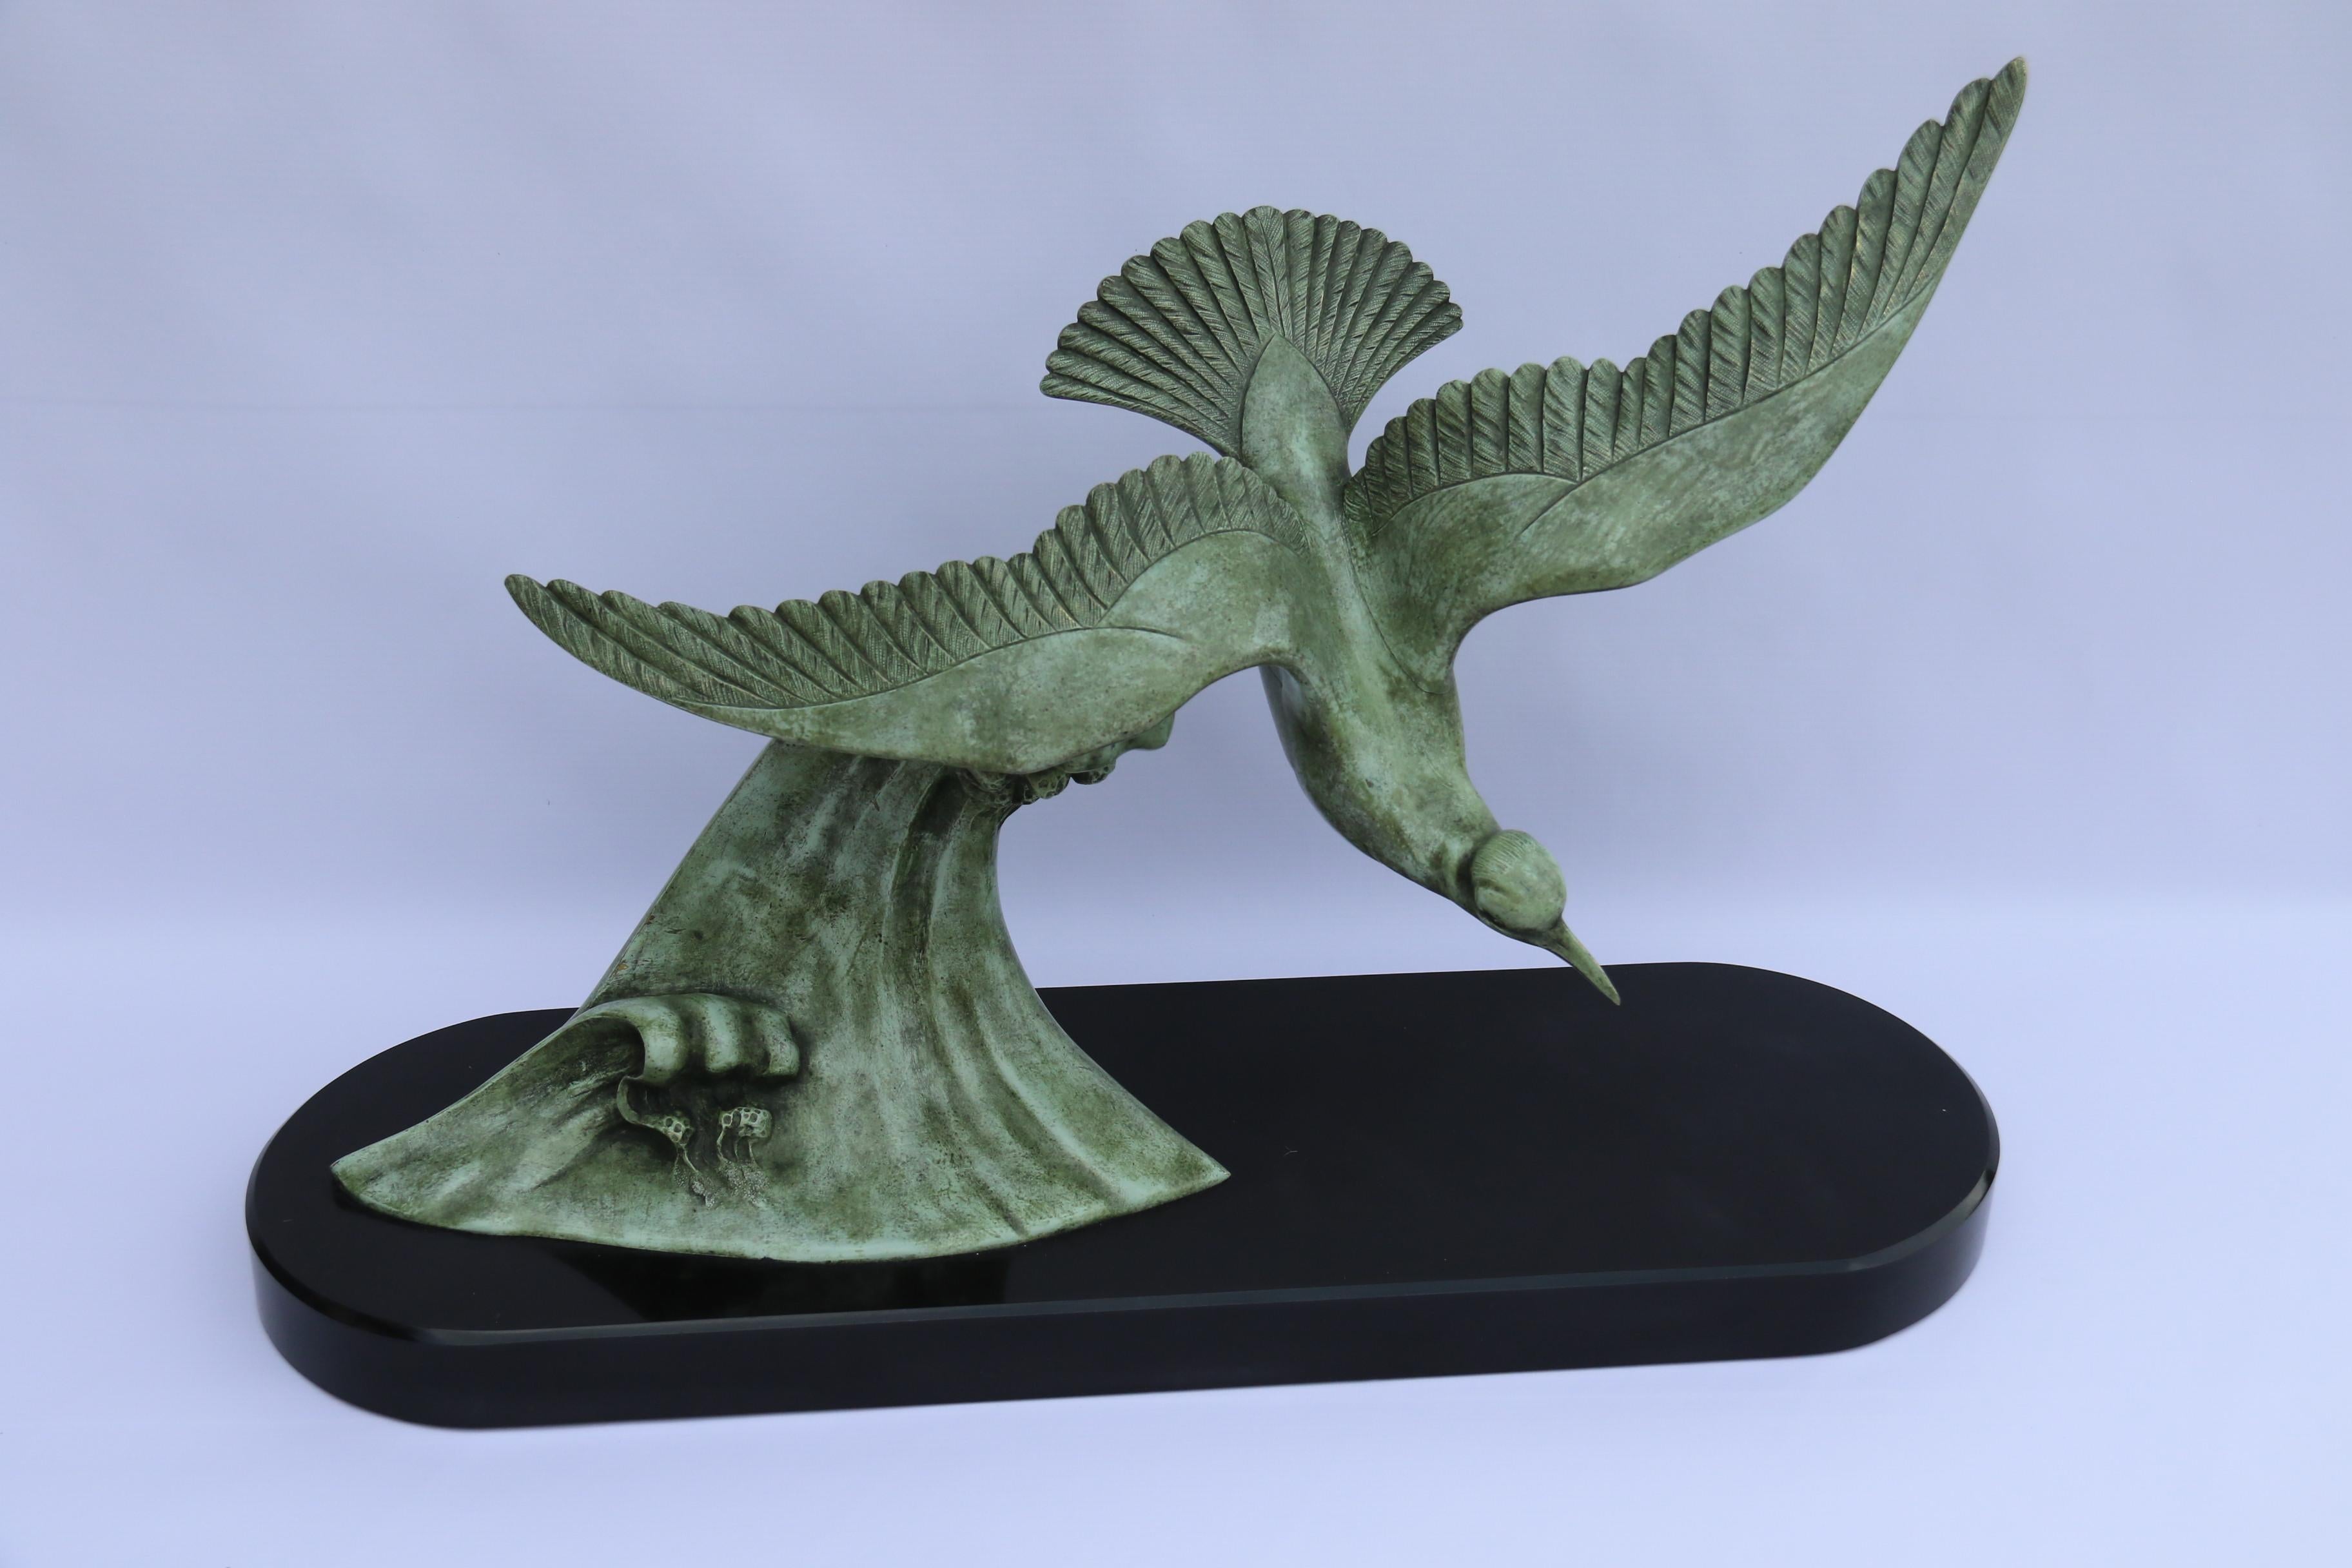 A large and impressive art deco bronze study of an albatross on the wing above a crested wave, by Emile Dautrive circa 1930

This most eye catching and stylish large art deco bronze study depicts a large albatross swooping in strong winds above a